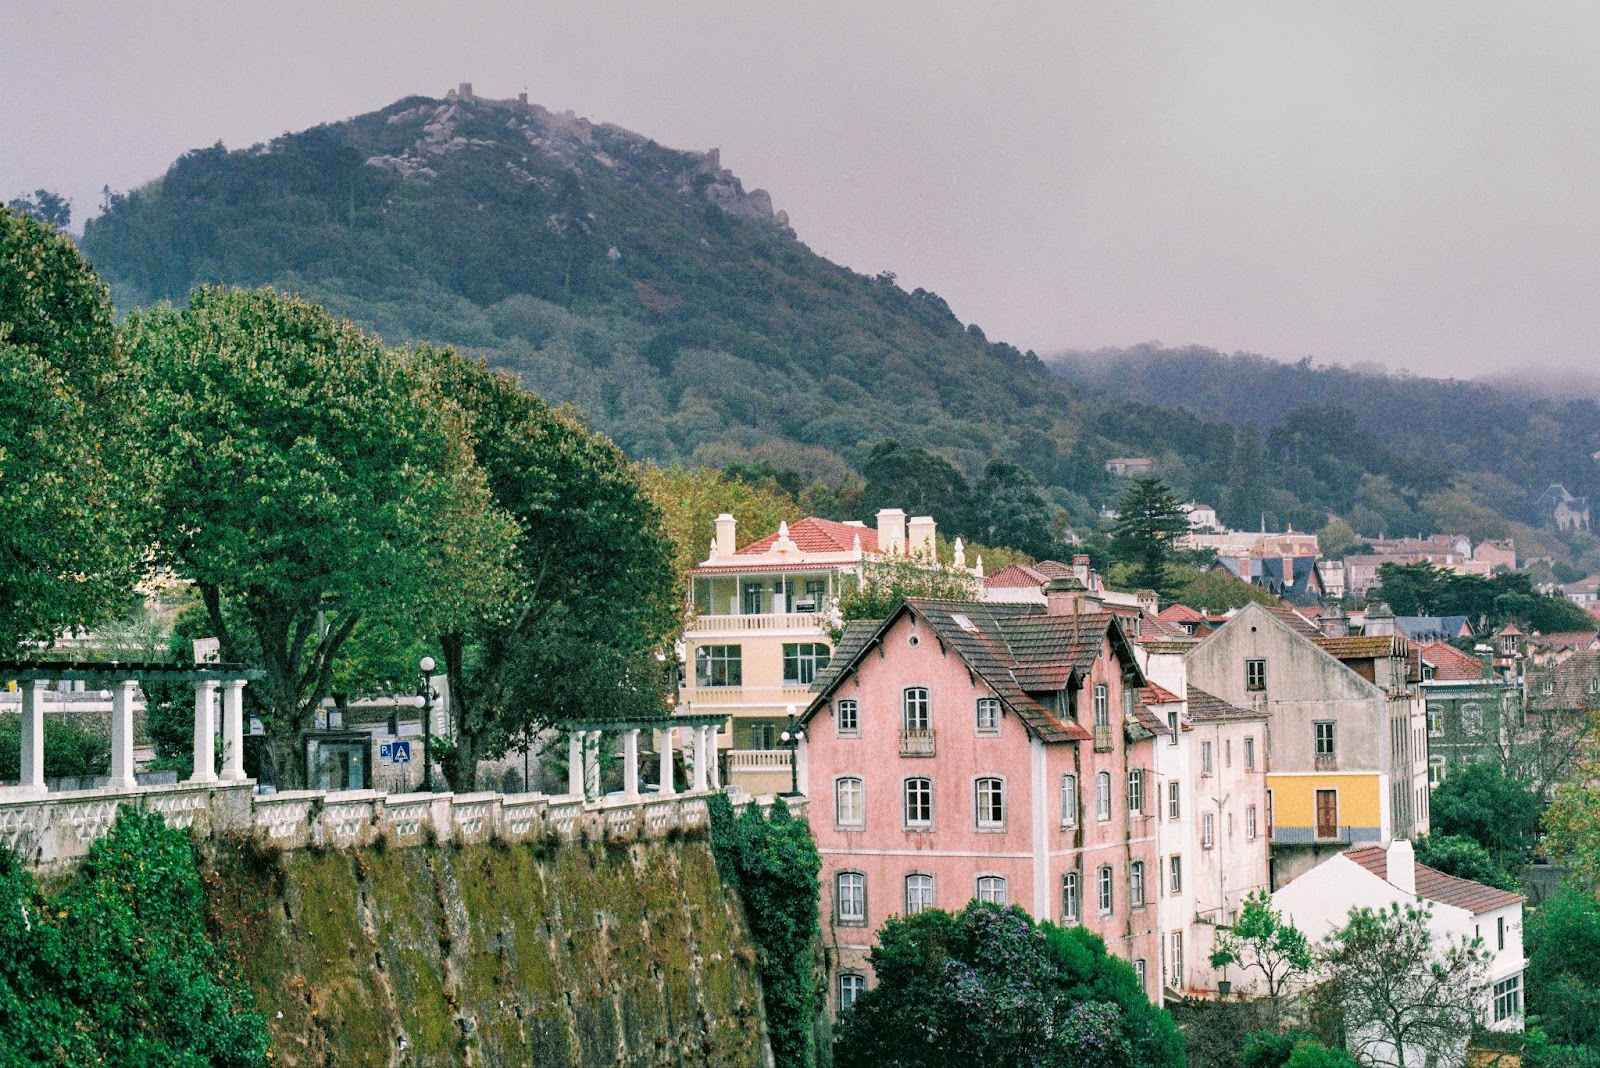 Take a Sintra Day Trip from Lisbon to See the Fairytale Town